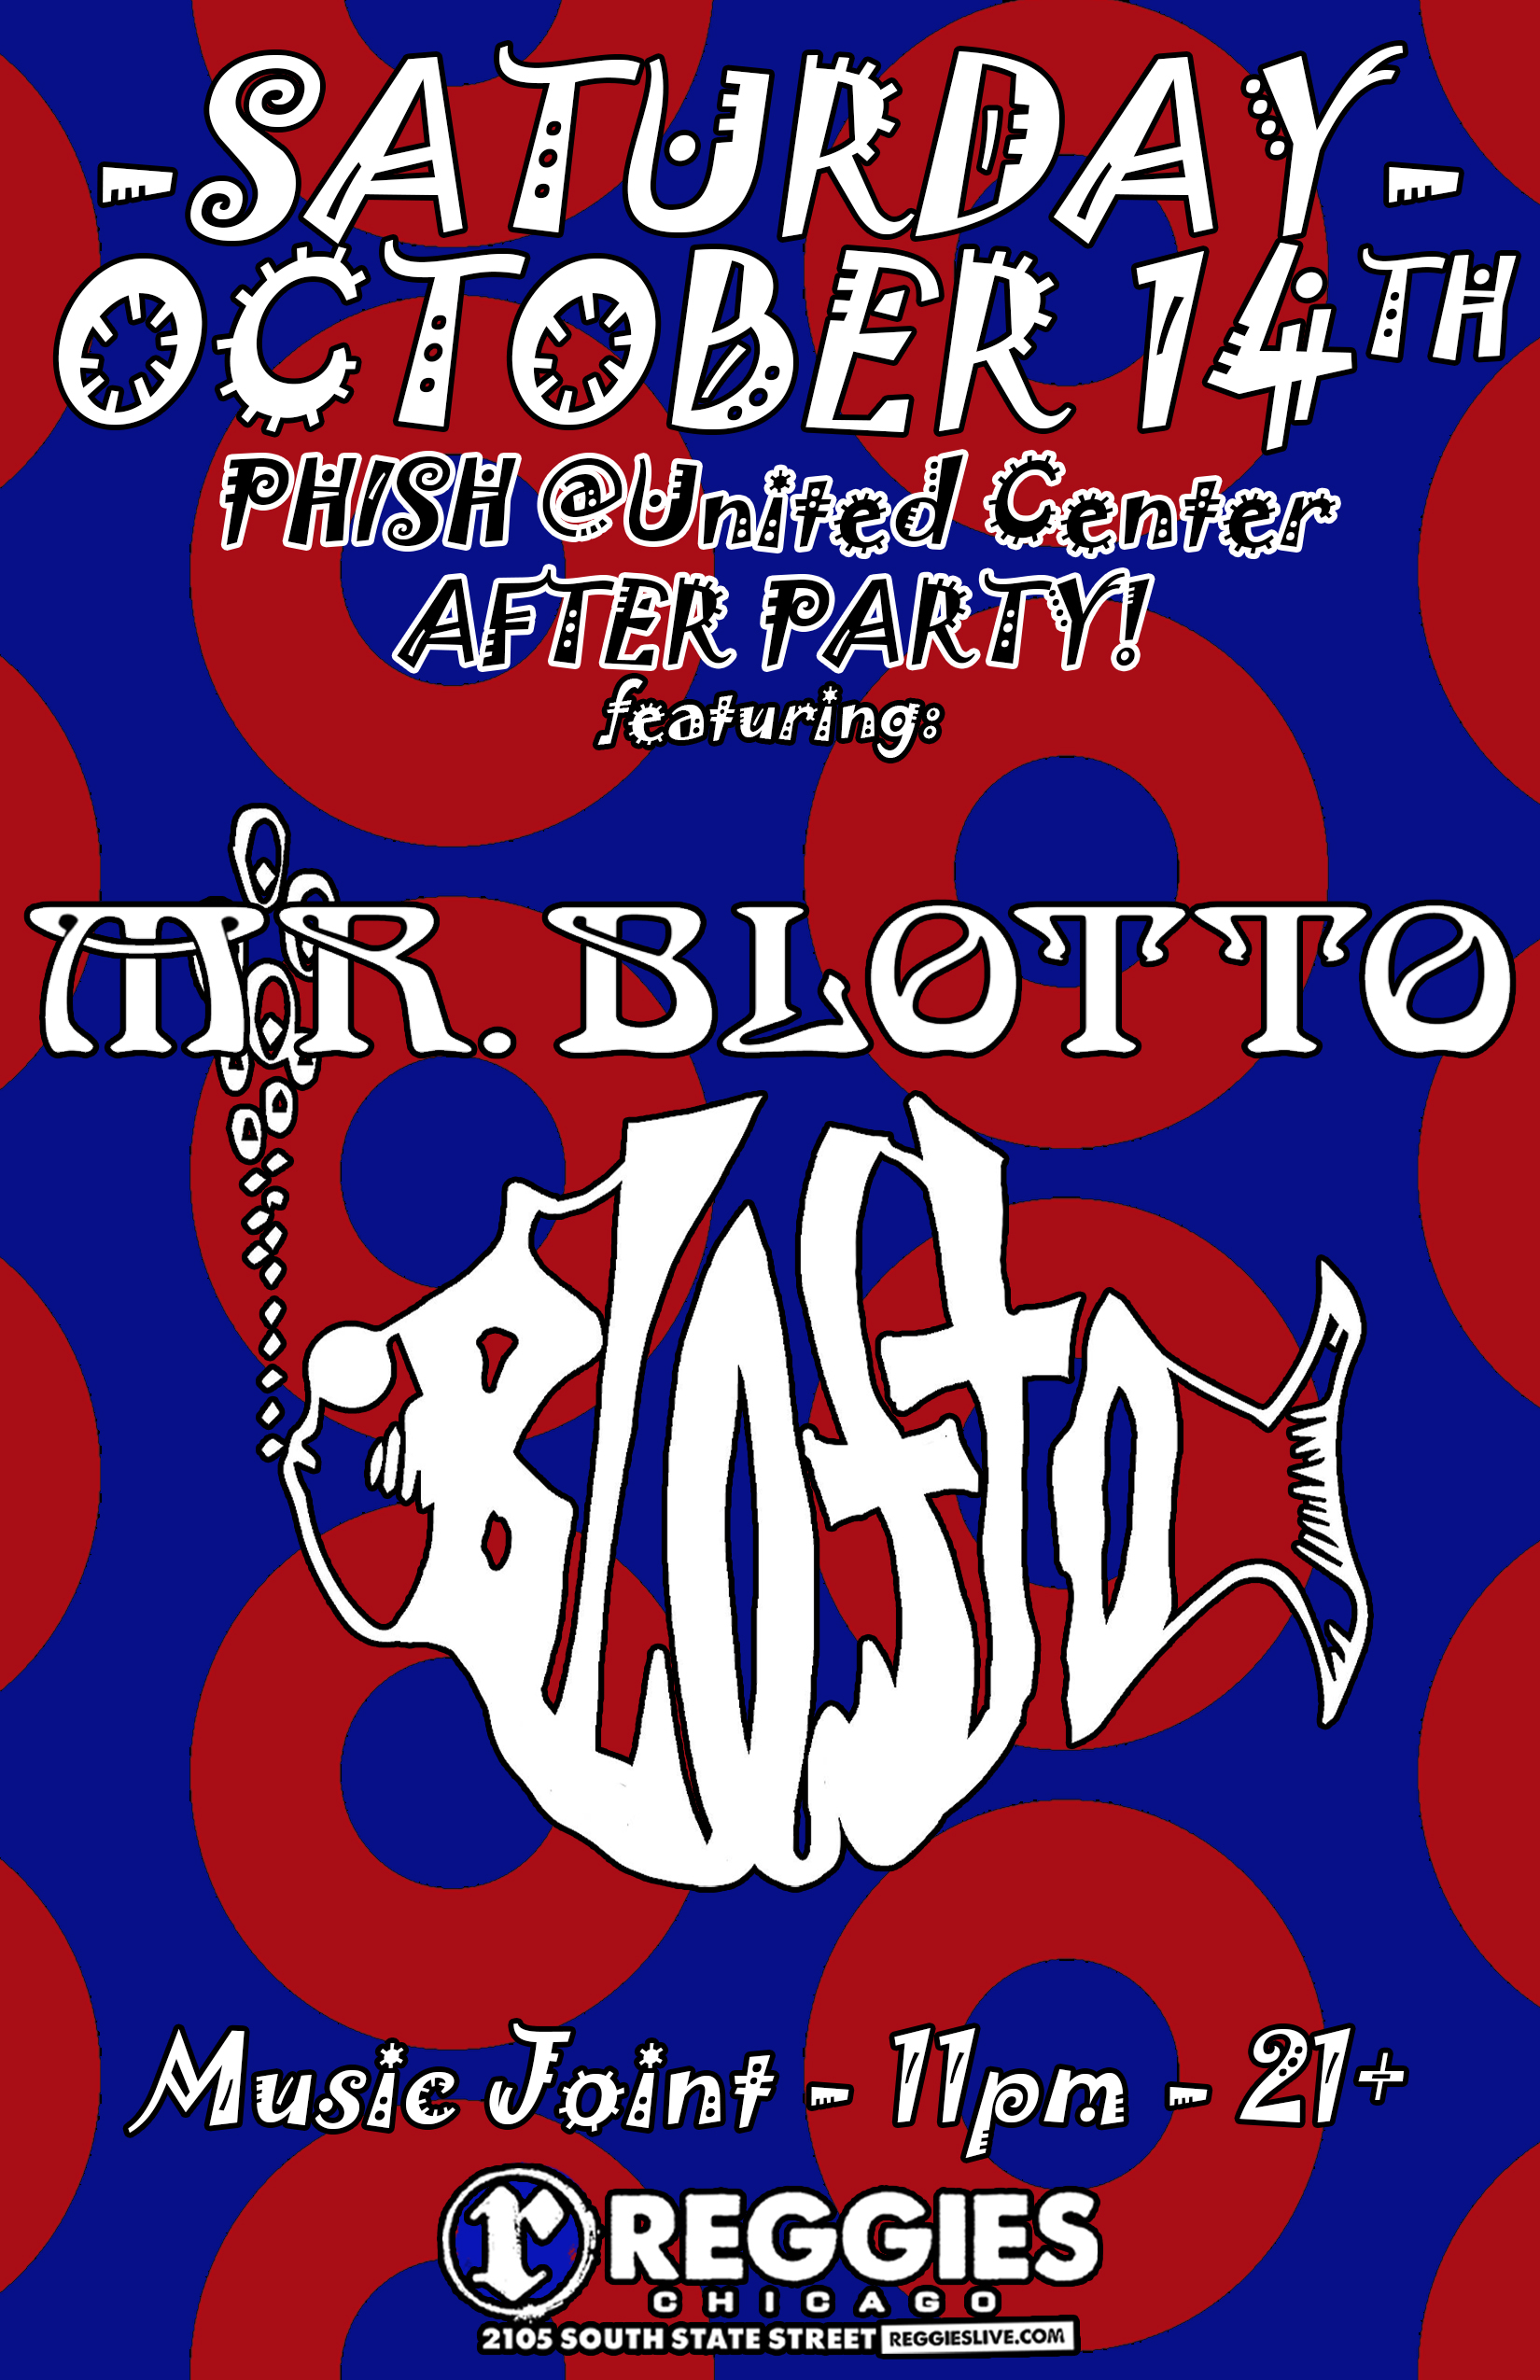 Mr. Blotto Phish at the United Center Afterparty